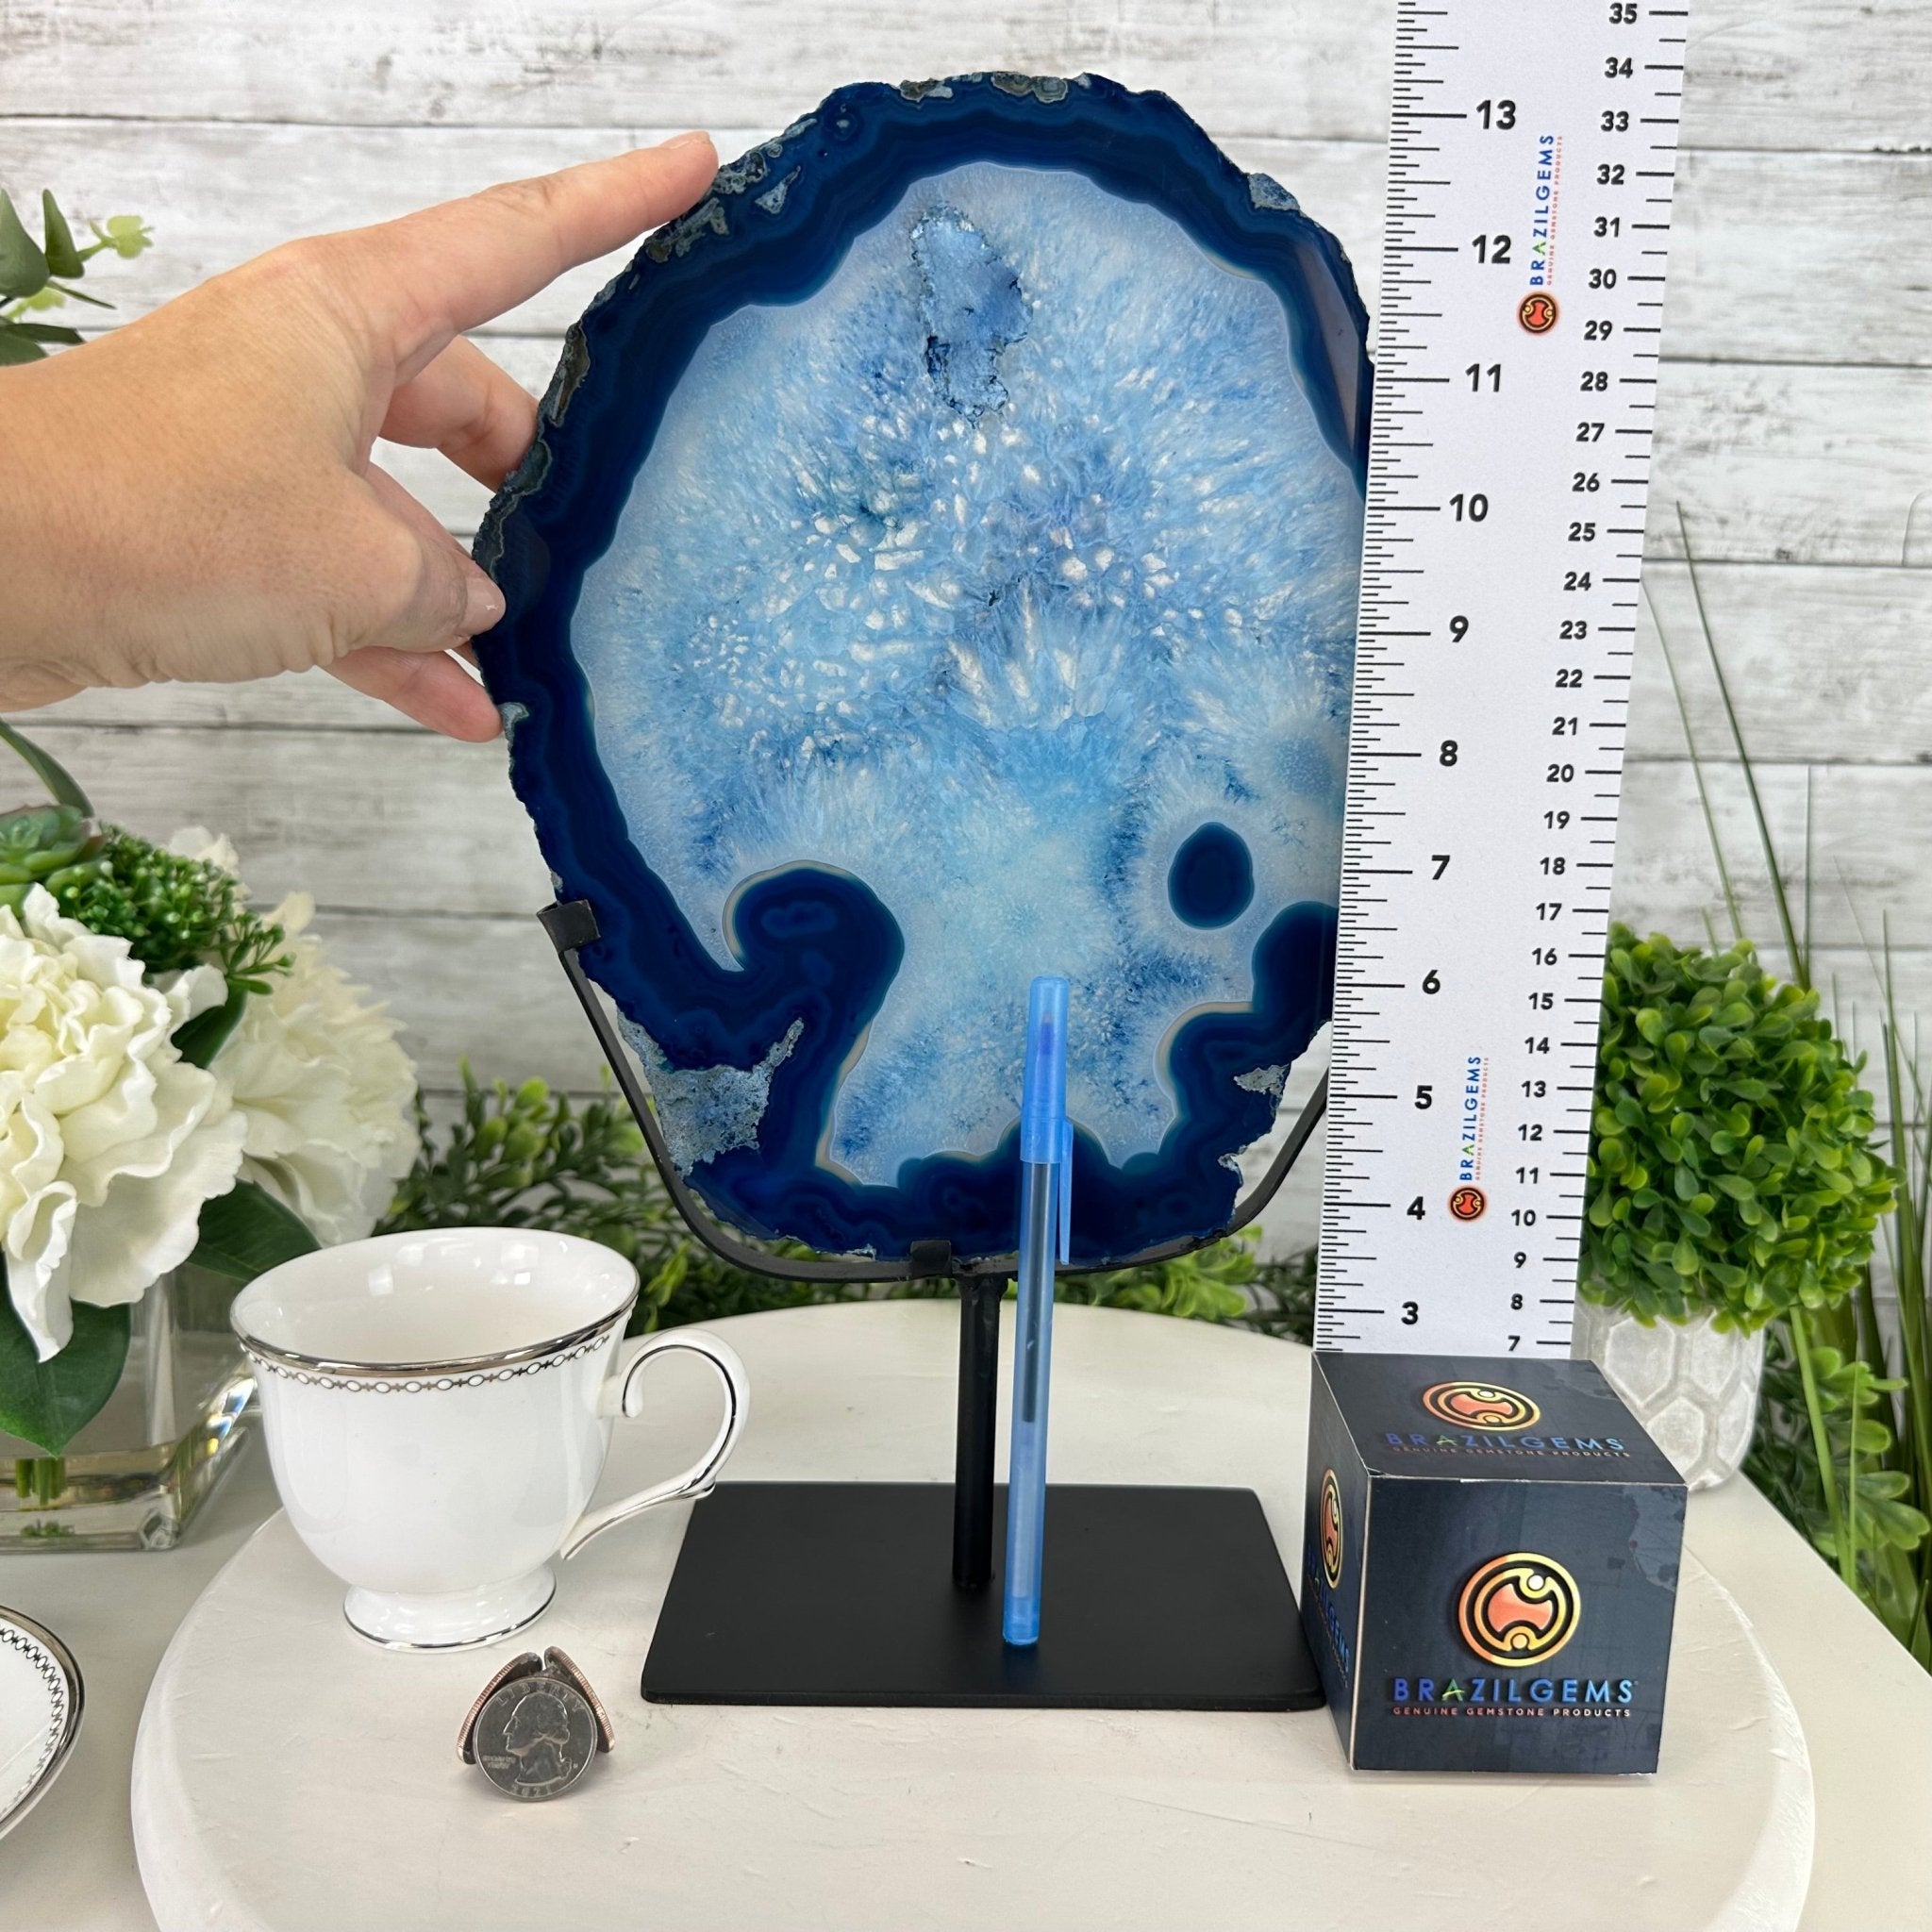 Brazilian Blue Agate Slice on a Metal Stand, 13.5" Tall Model #5055-0197 - Brazil GemsBrazil GemsBrazilian Blue Agate Slice on a Metal Stand, 13.5" Tall Model #5055-0197Slices on Fixed Bases5055-0197